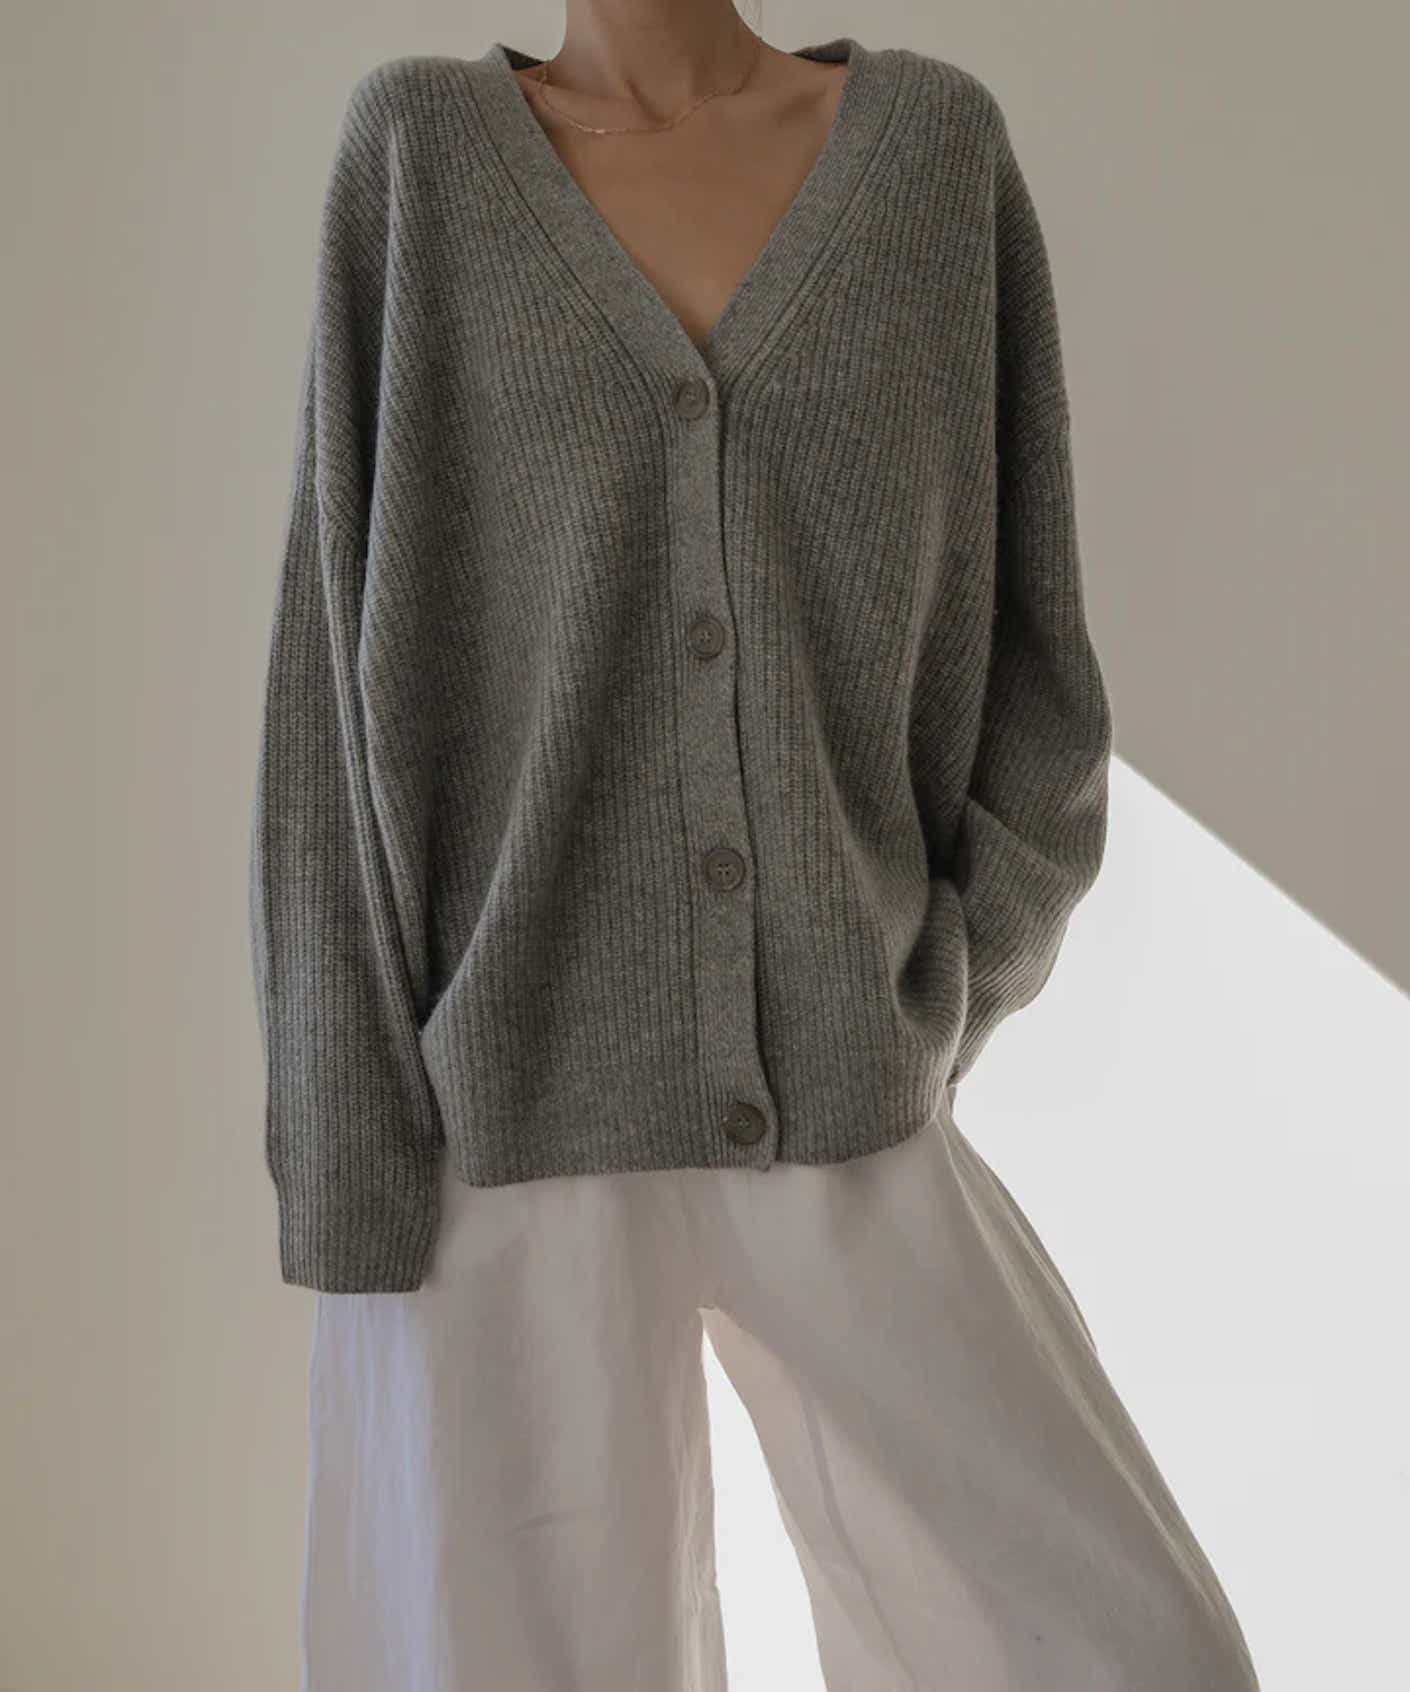 A woman poses in a slouchy cashmere caradigan.